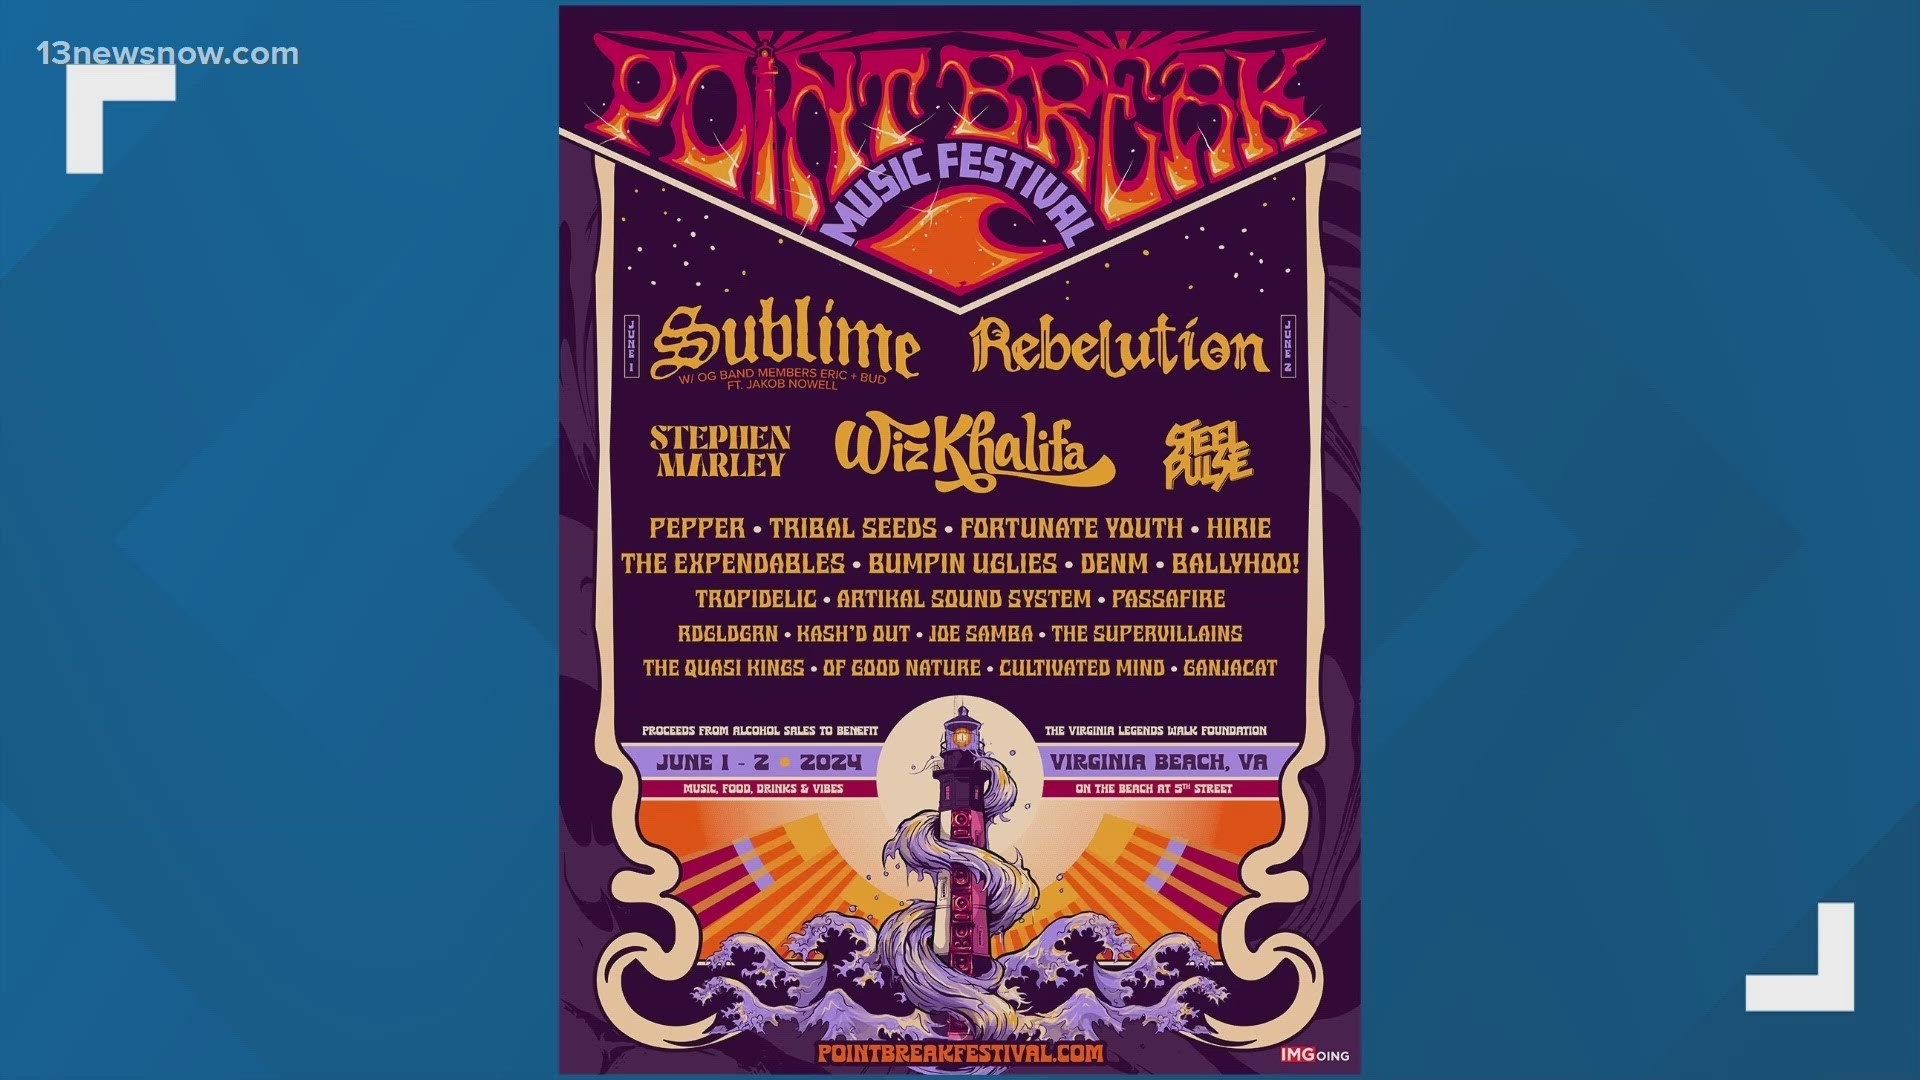 The Point Break Festival is set to debut June first and second with sublime headlining and Wiz Khalifa, Stephen Marley and Steel Pulse as part of the line-up.